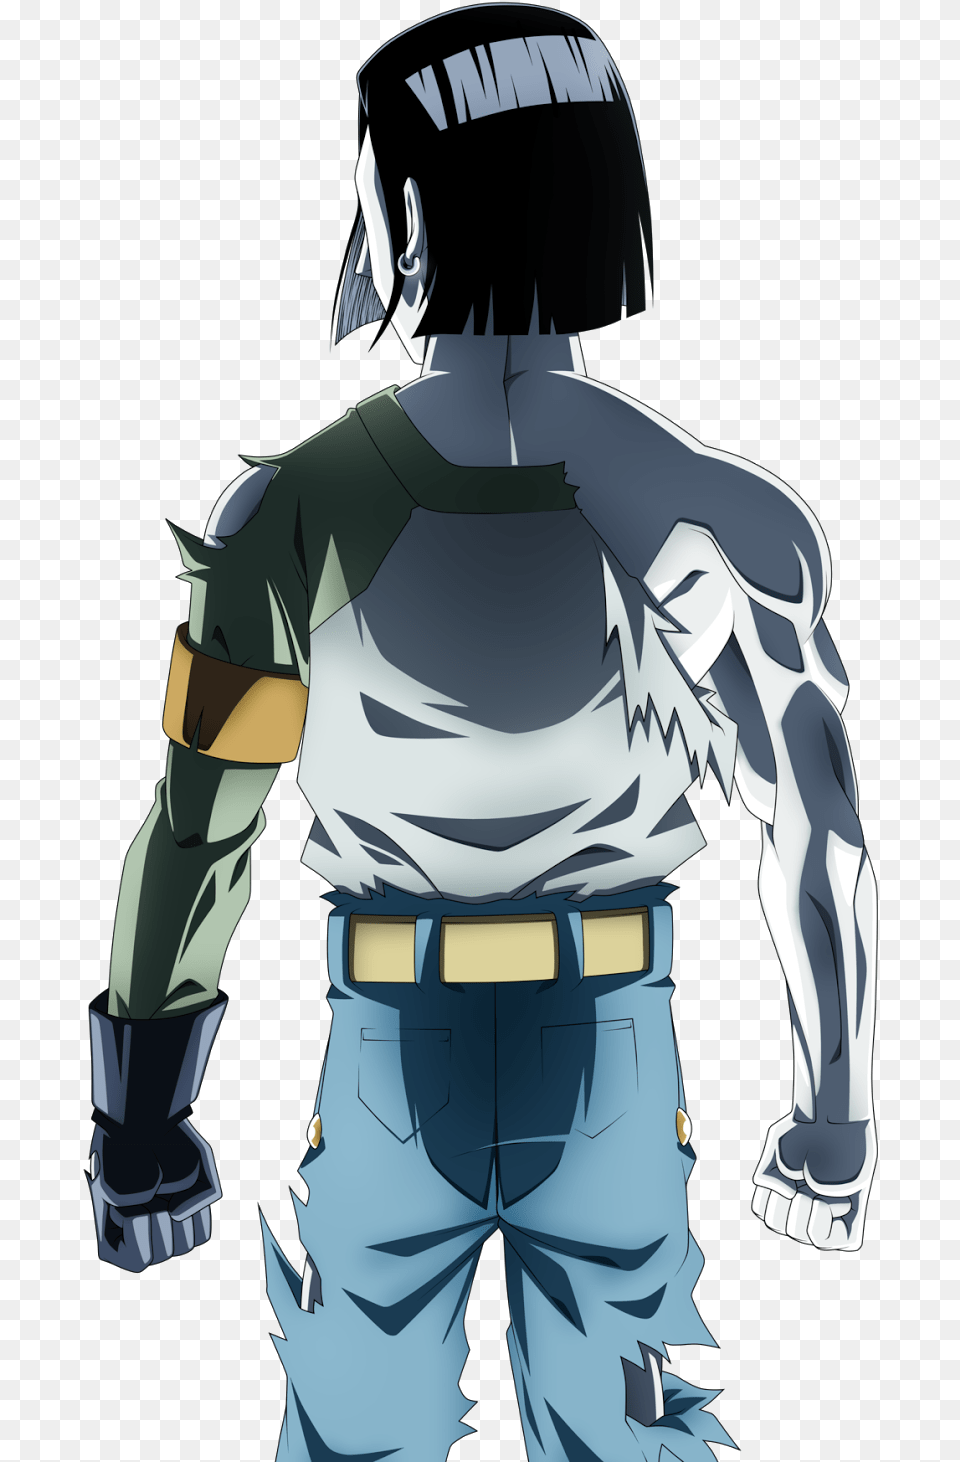 Download Android 17 Super Android 17 Image With No Android 17 Dragon Ball Super, Adult, Male, Man, Person Png